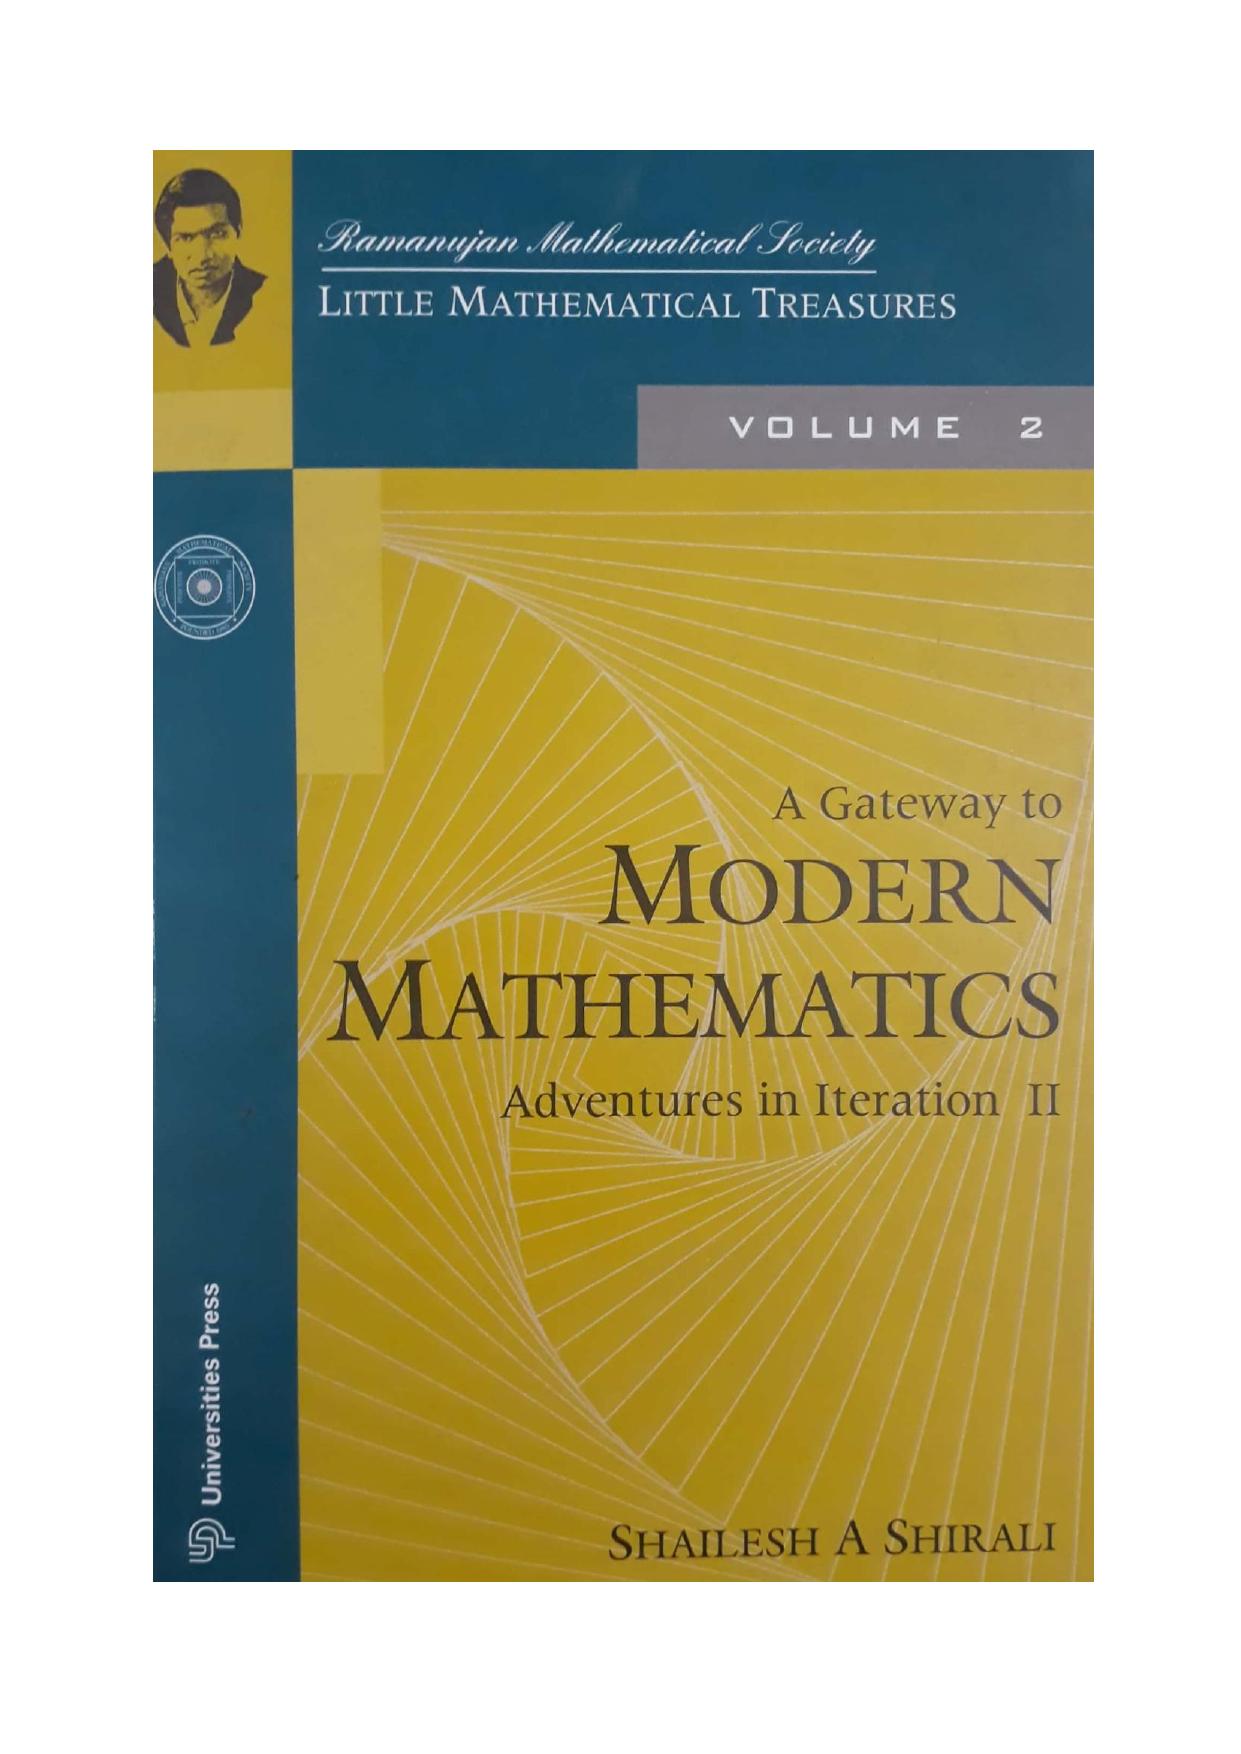 A Gateway to Modern Mathematics Adventures in Iterations II ( Volume 2 ) by Shailesh A